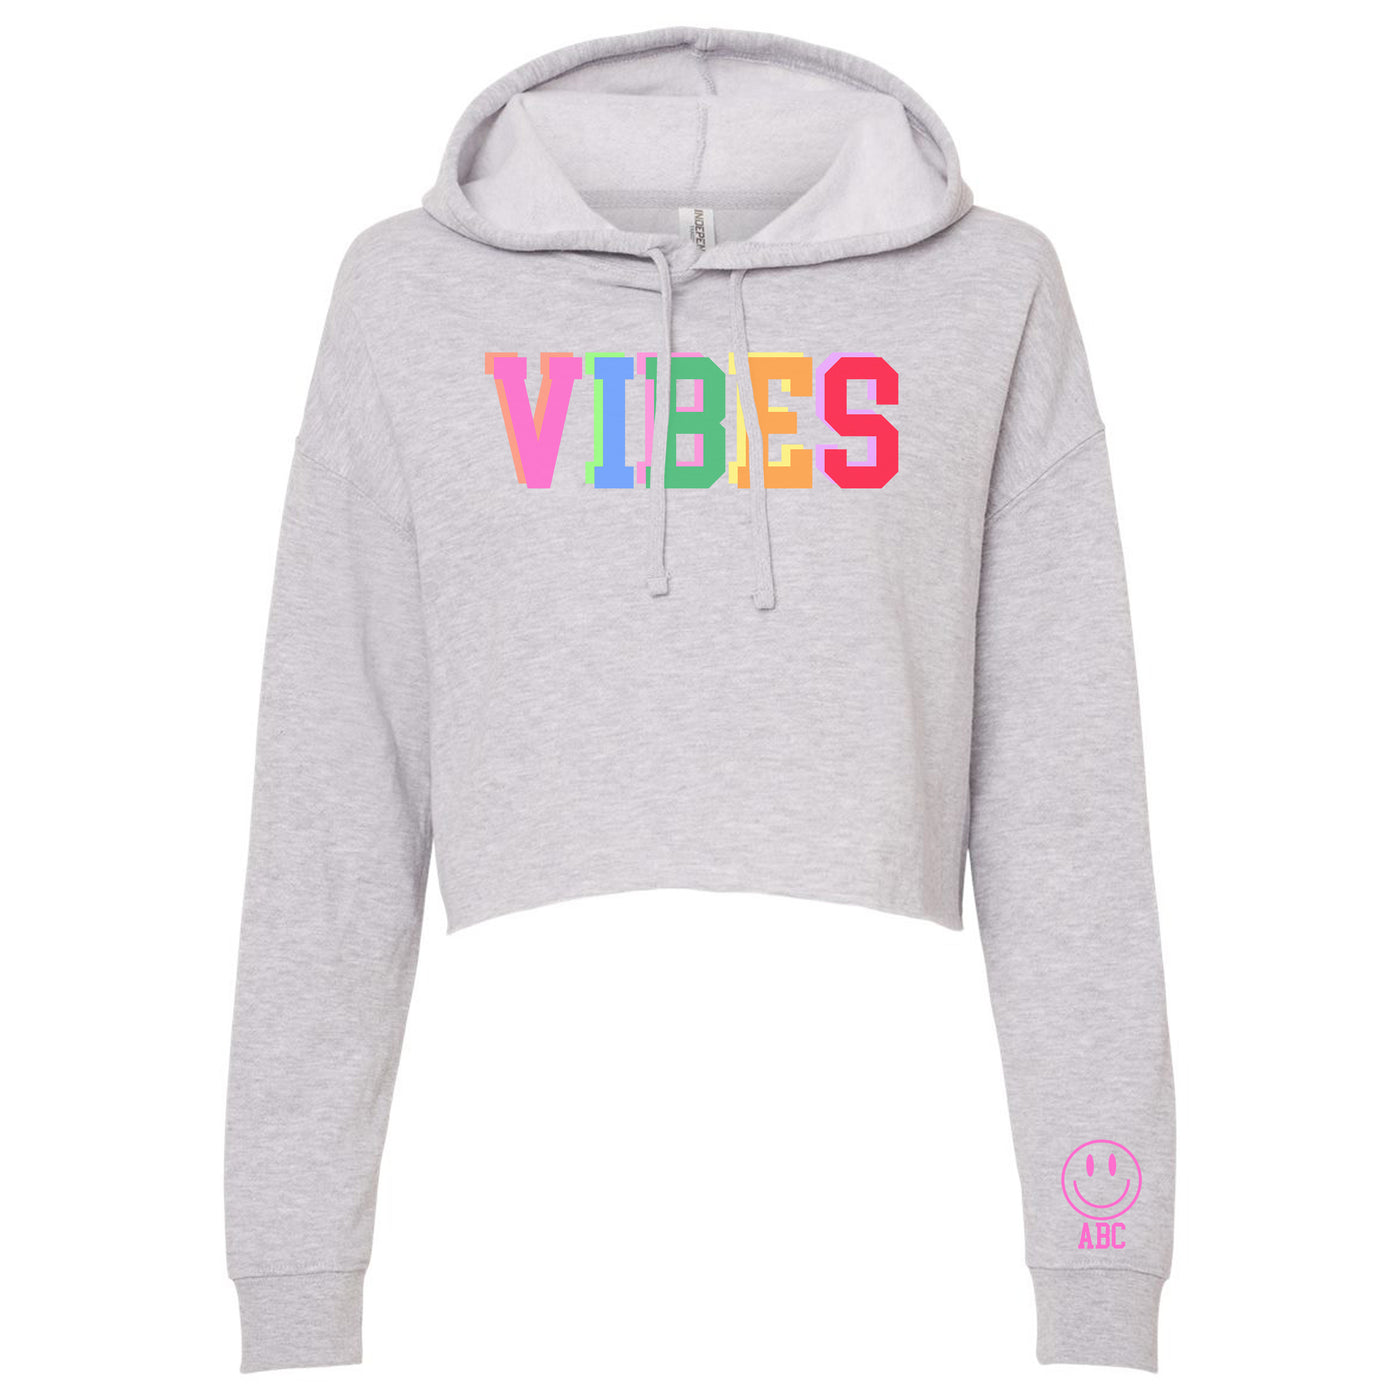 Initialed Sleeve Colorful Block 'Vibes' Cropped Hoodie